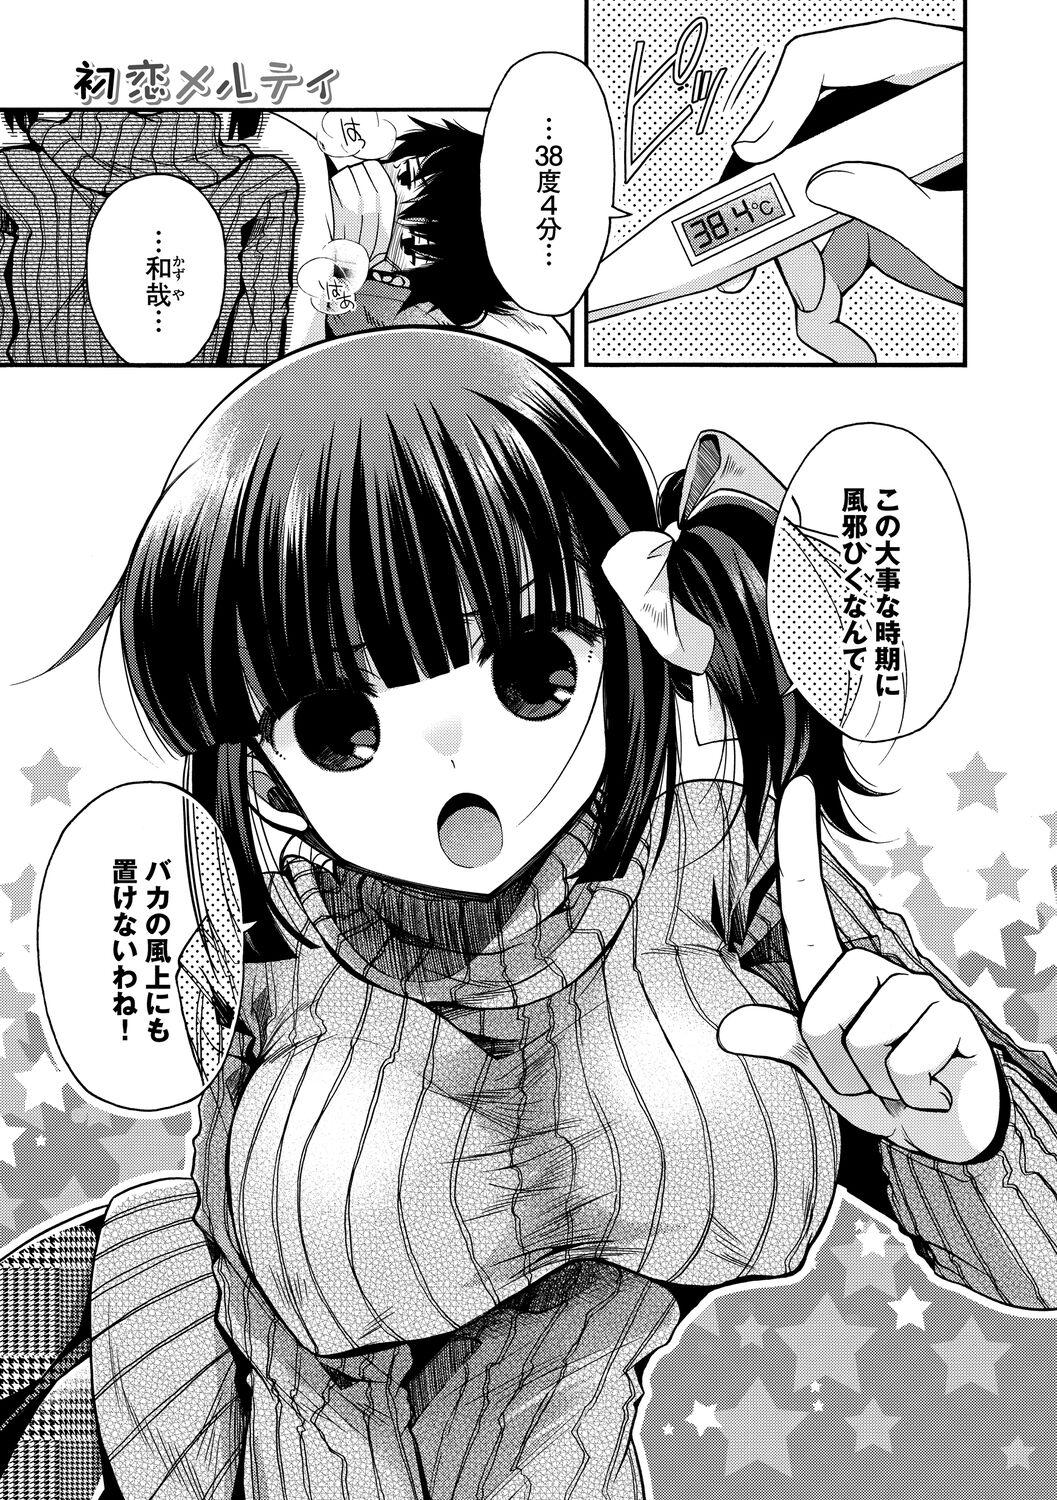 Hatsukoi Melty - Melty First Love 154